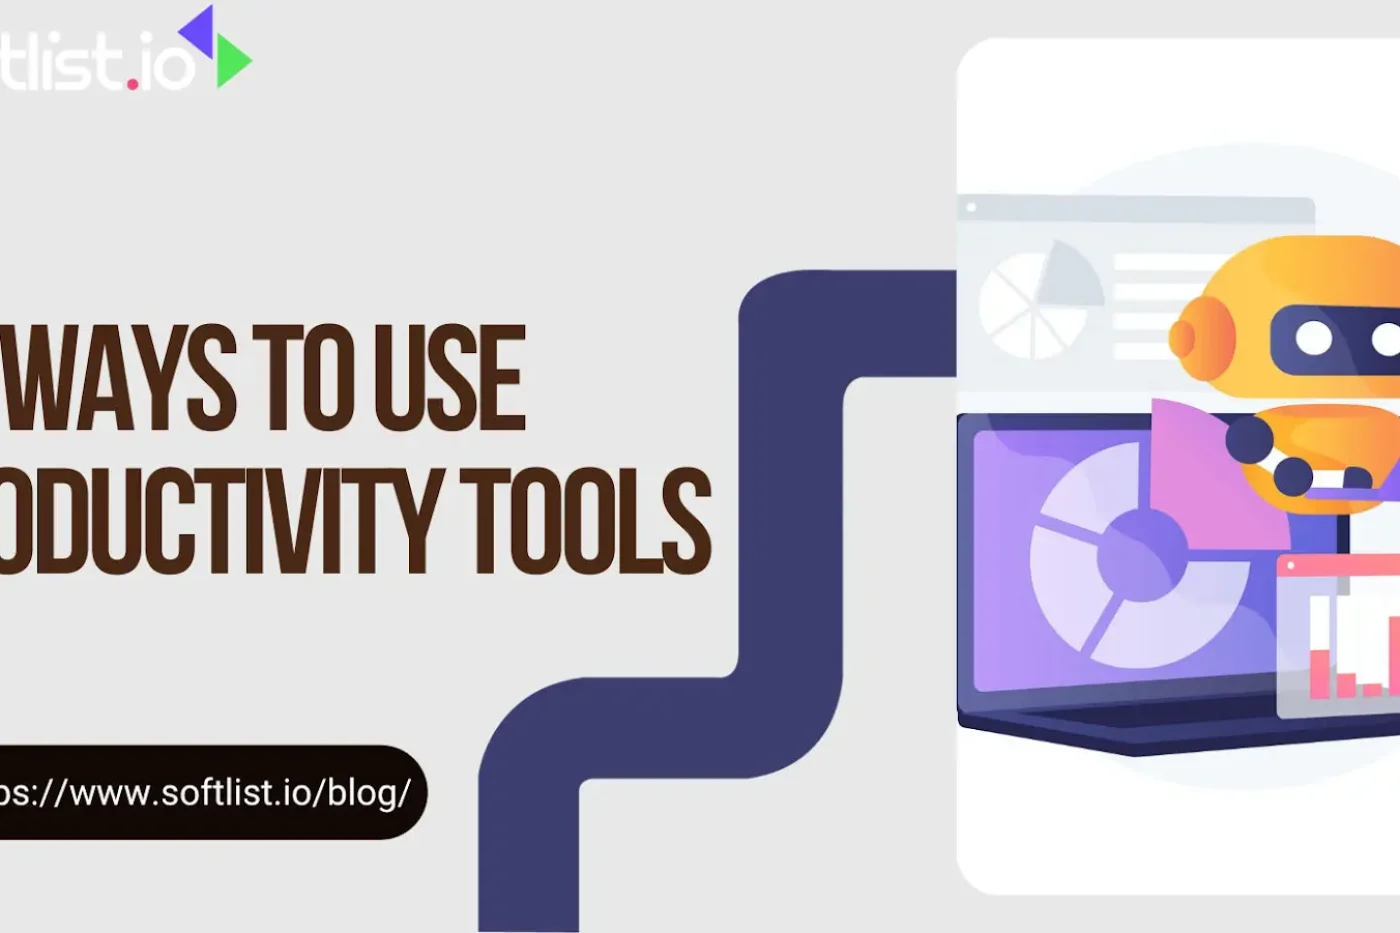 A Guide to 15 Effective Uses of Productivity Tools